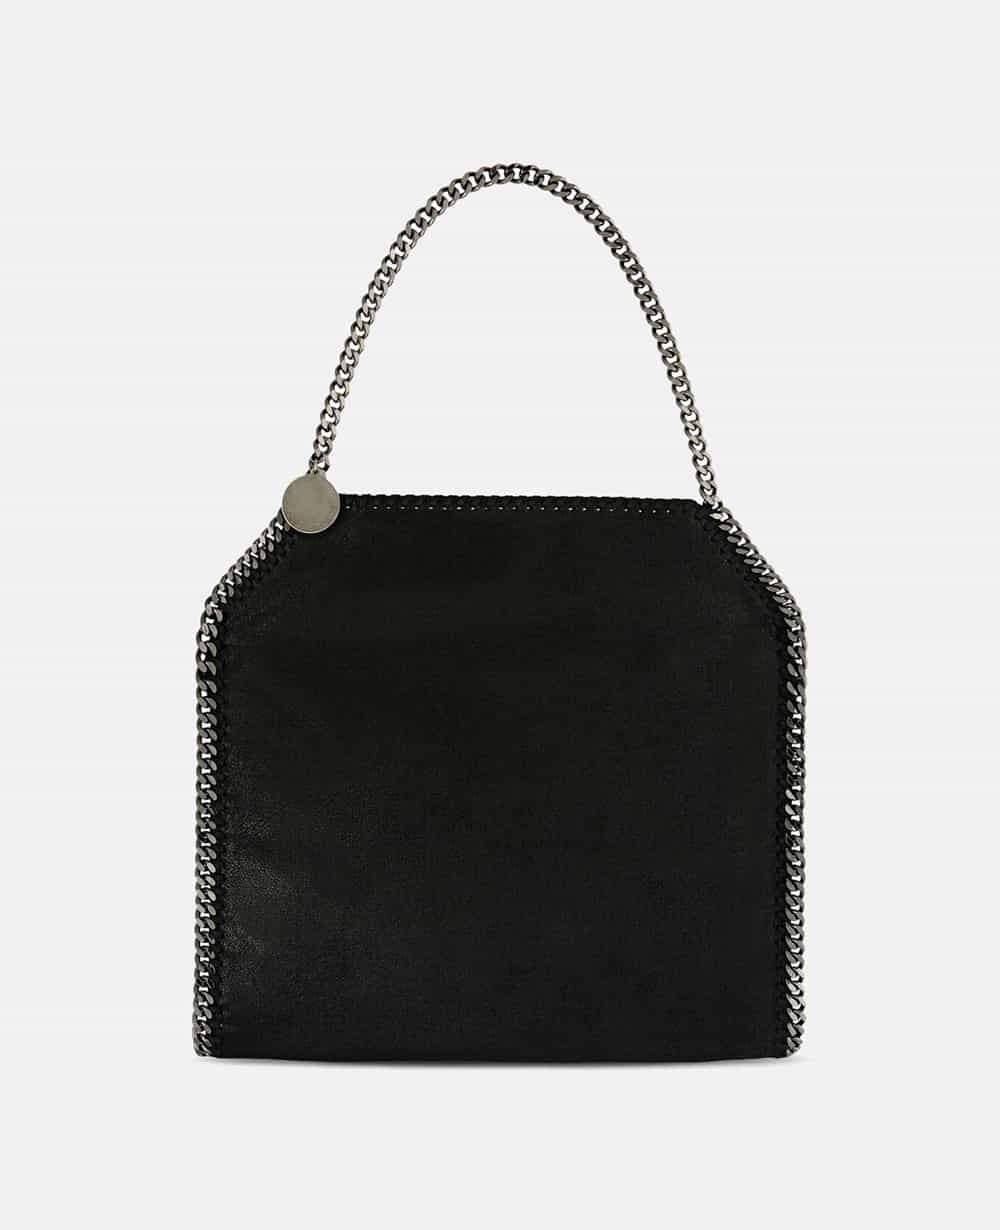 Black tote with silver chain